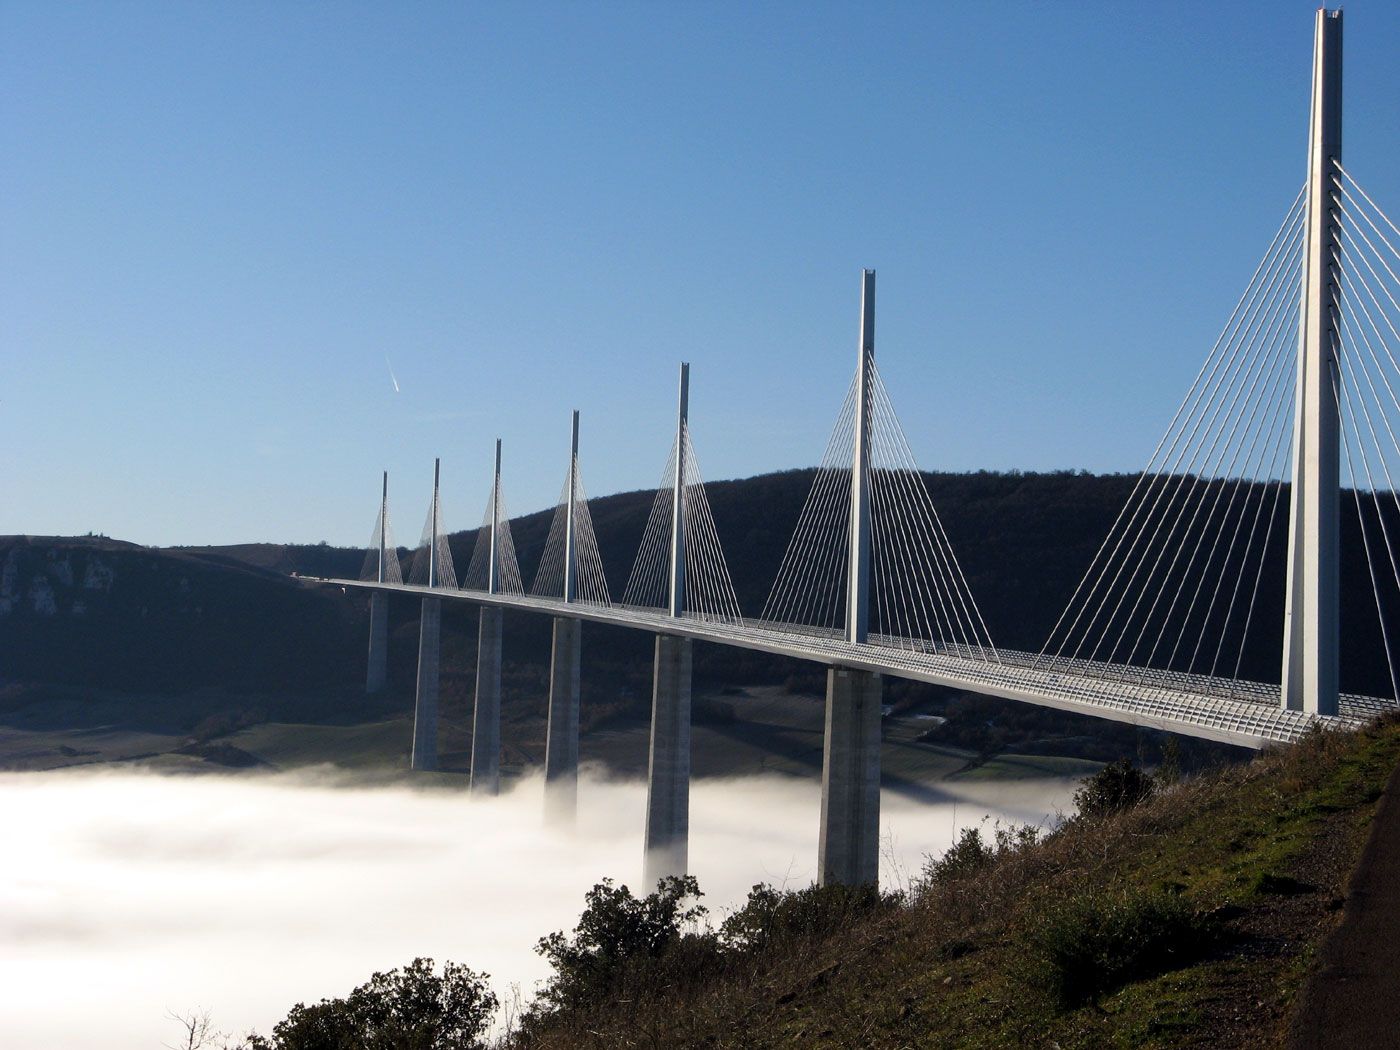 Millau Viaduct Pictures wallpaper 1400x1050